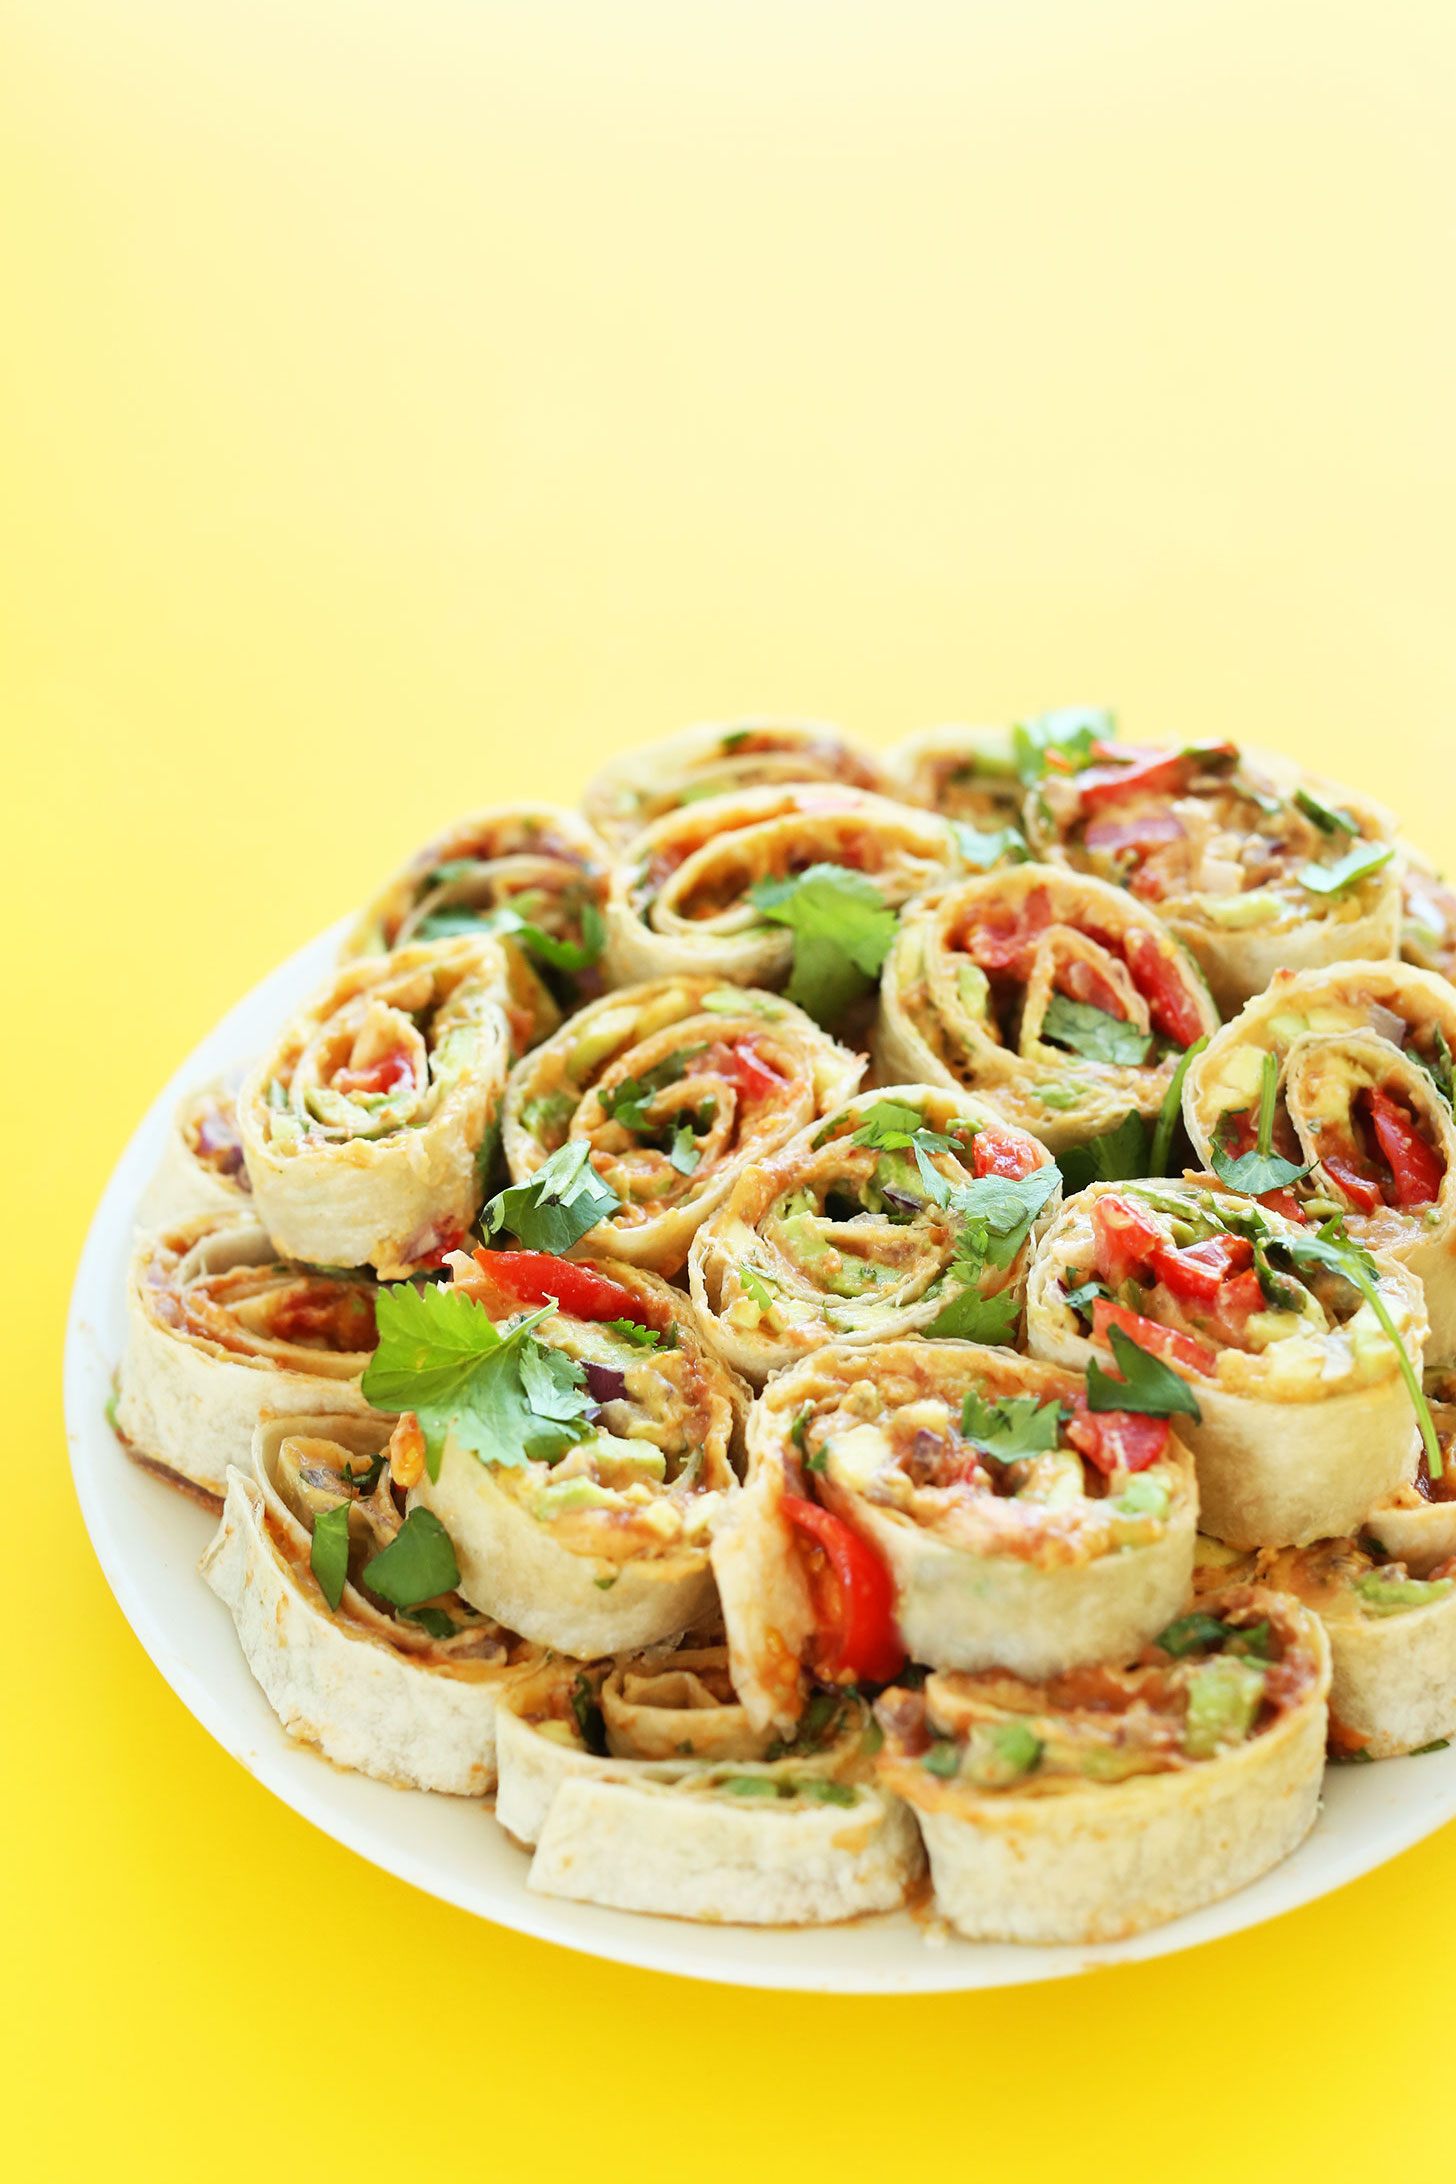 https://minimalistbaker.com/wp-content/uploads/2015/08/AMAZING-Mexican-Pinwheels-with-Refried-Beans-Avocado-Onion-Cilantro-and-Tomato-Such-a-delicious-vegan-friendly-finger-food-recipe-healthy-snack-mexican-1.jpg